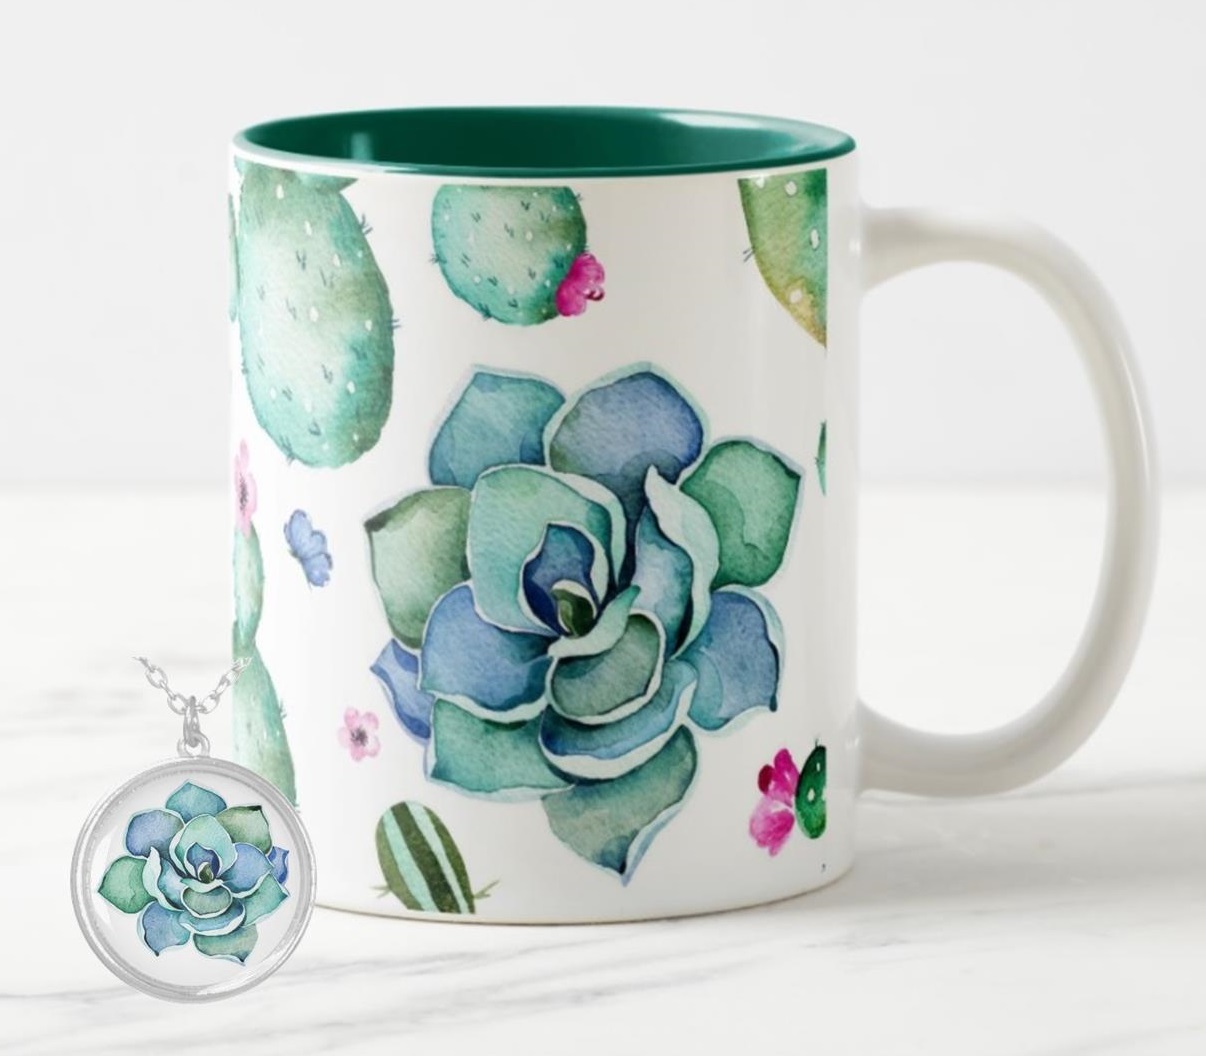 cute mug and pendant are great gifts for succulent lovers